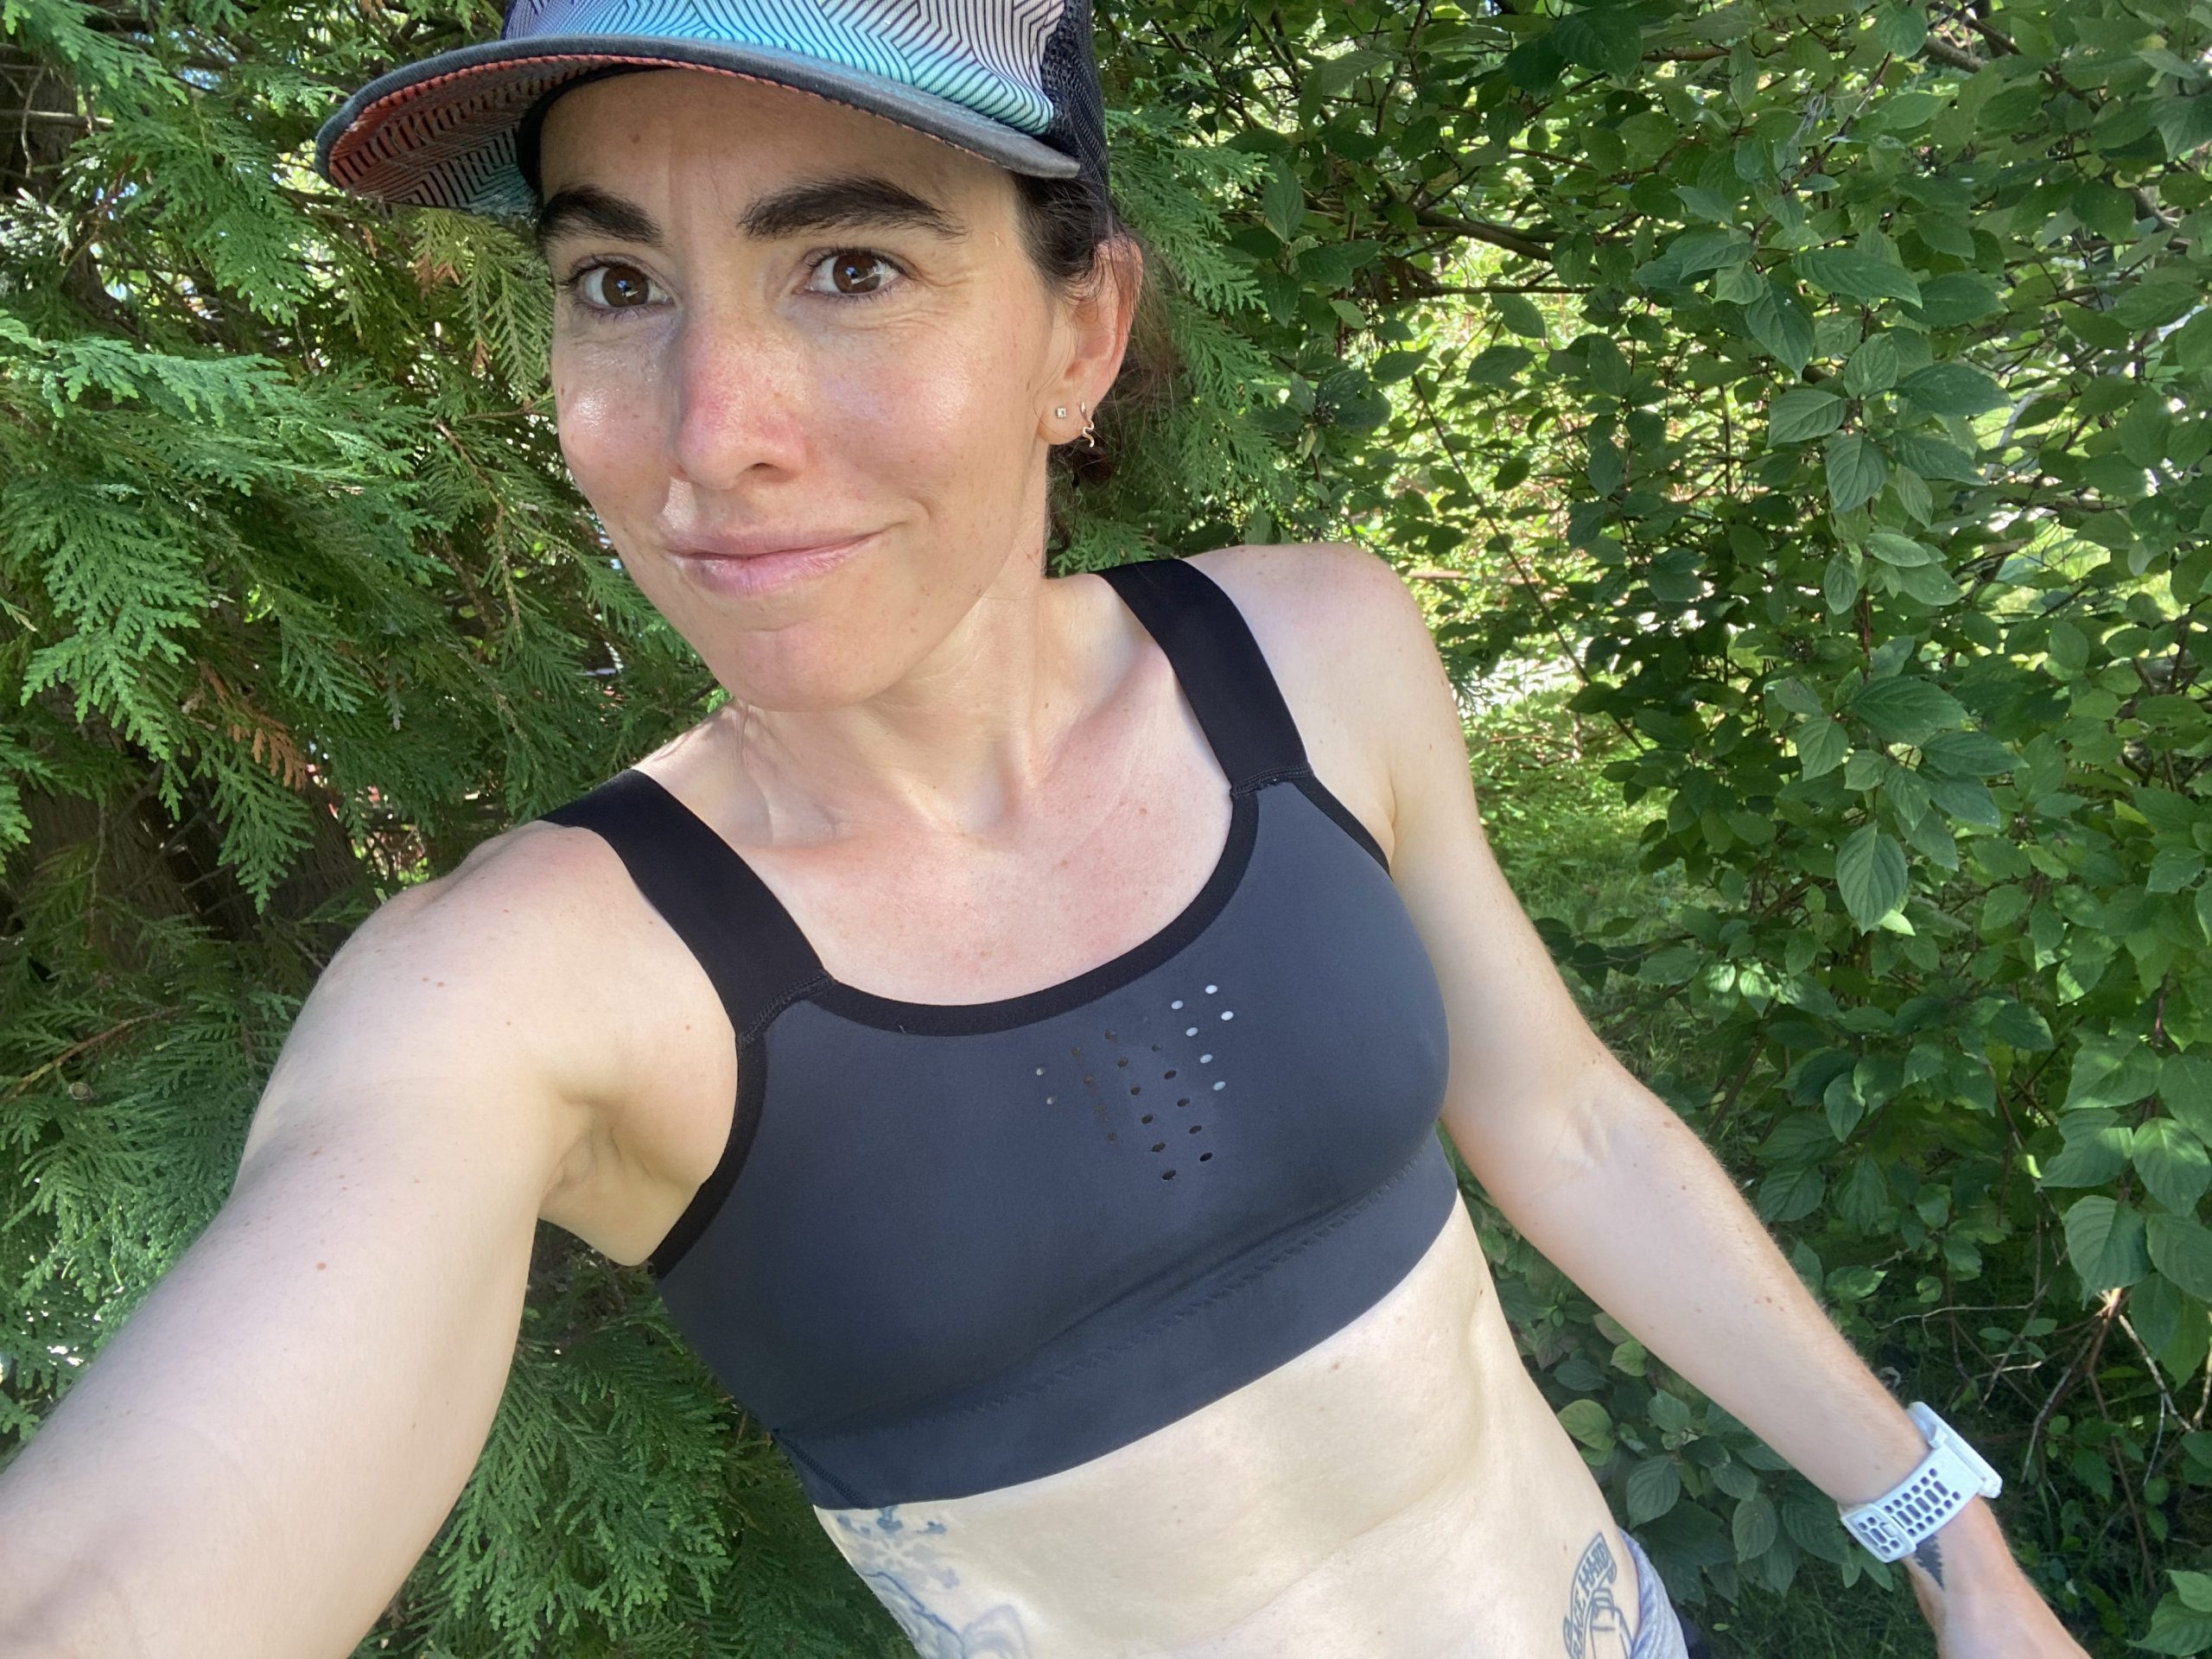 A person wearing a sports bra and a cap is posing outdoors amidst greenery. The individual has tattoos on their arms and appears to be engaging in a physical activity or exercise routine.